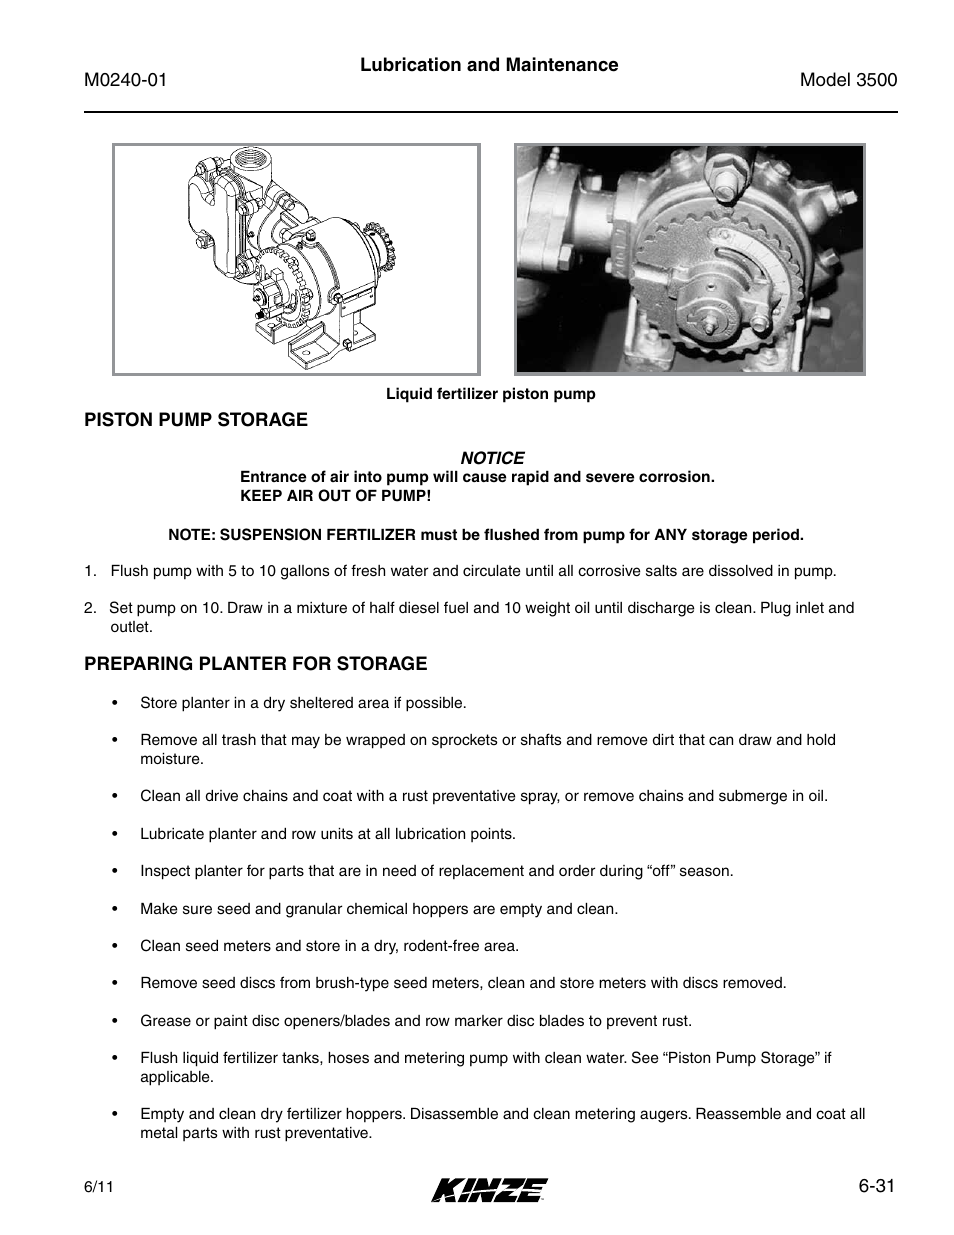 Kinze 3500 Lift and Rotate Planter Rev. 7/14 User Manual | Page 127 / 140